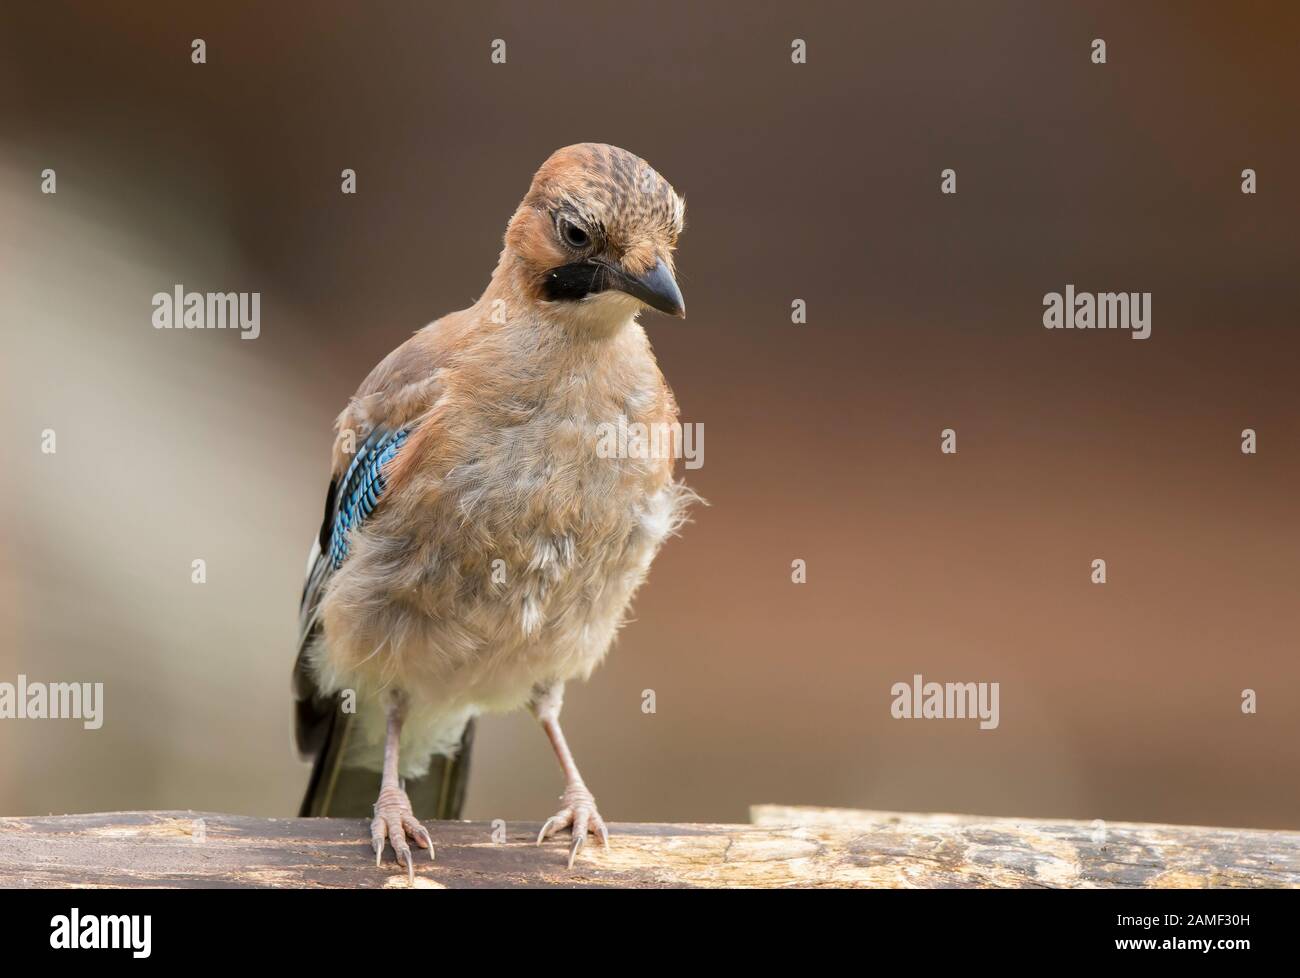 Detailed, front view close up of juvenile UK jay bird (Garrulus glandarius) with downy feathers, isolated outdoors in summer perched on garden log. Stock Photo